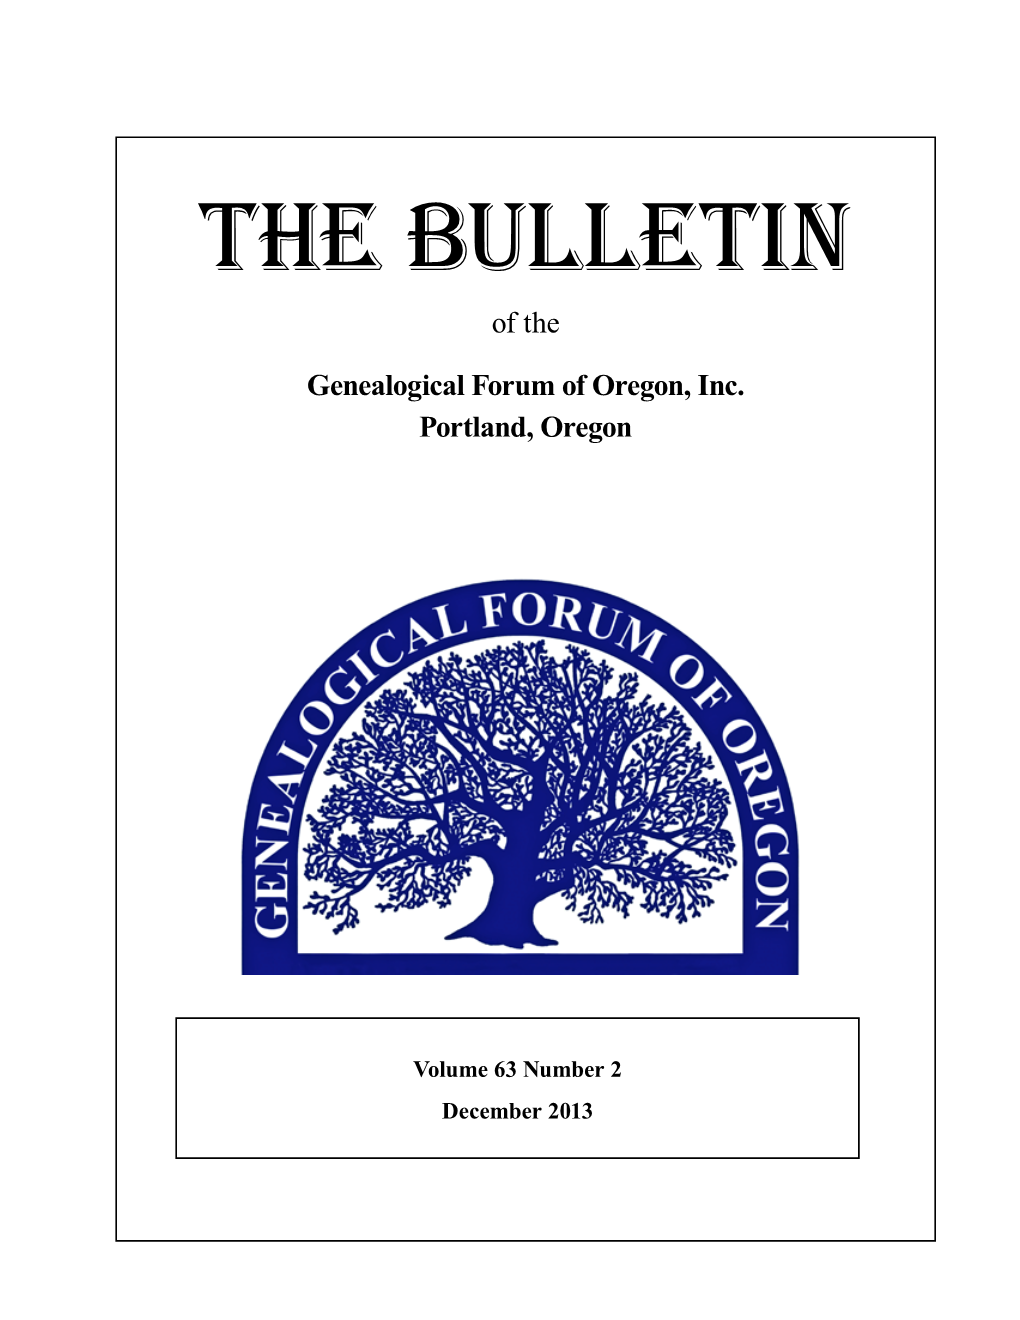 The Bulletin of The